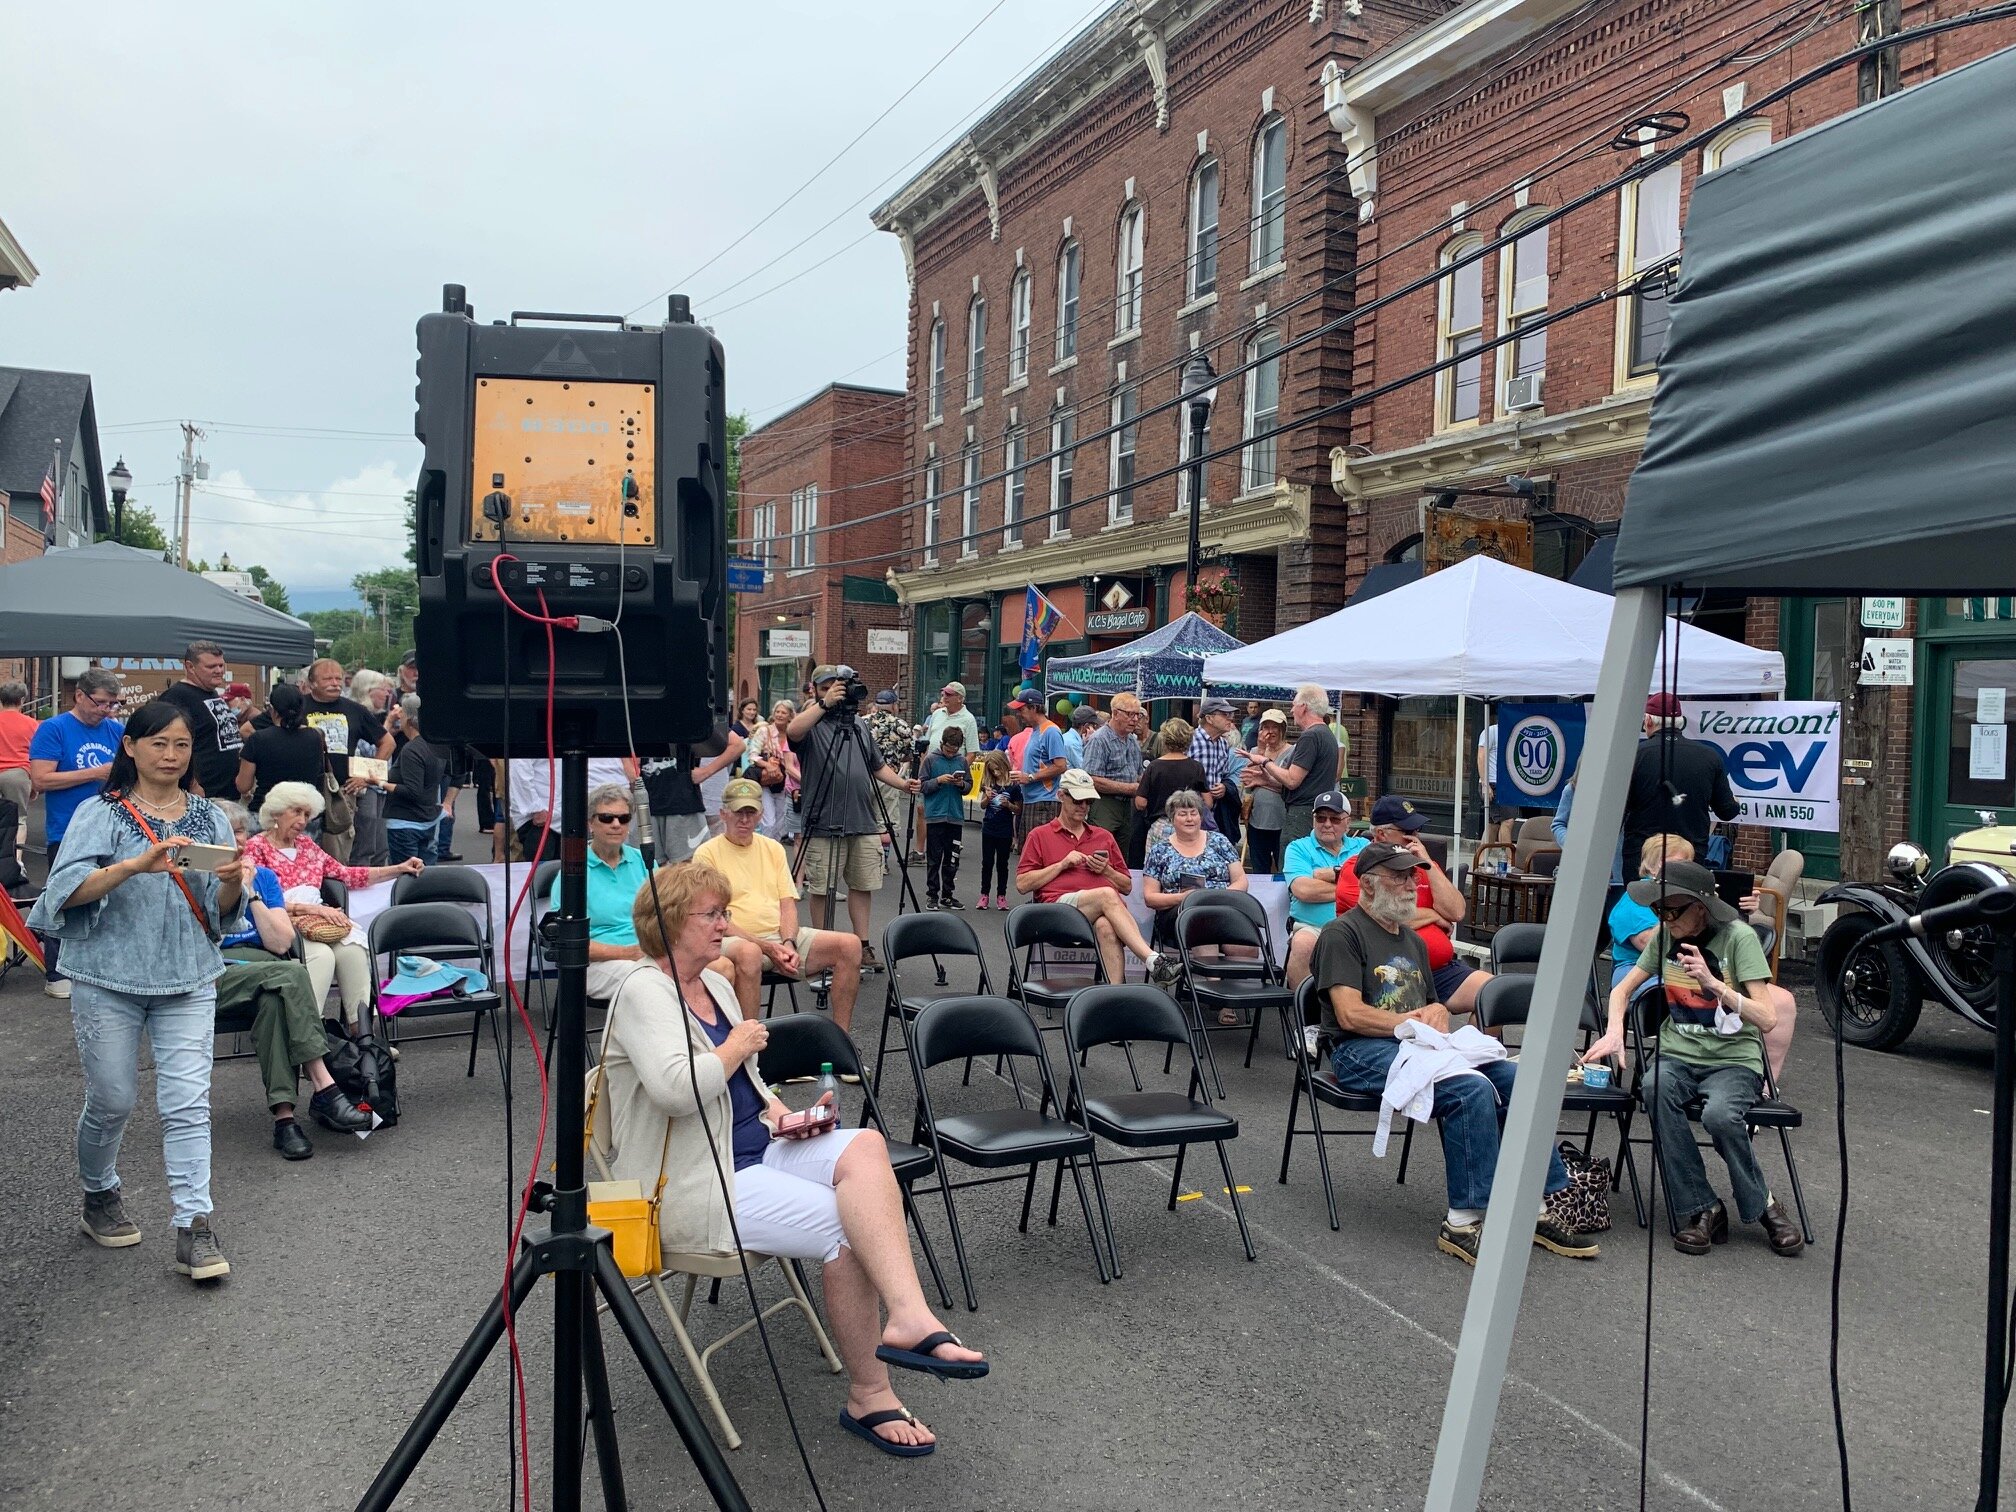   By midday, the crowd has settled in as the lower block of Stowe Street is transformed into a live radio studio. Photo by Lisa Scagliotti  